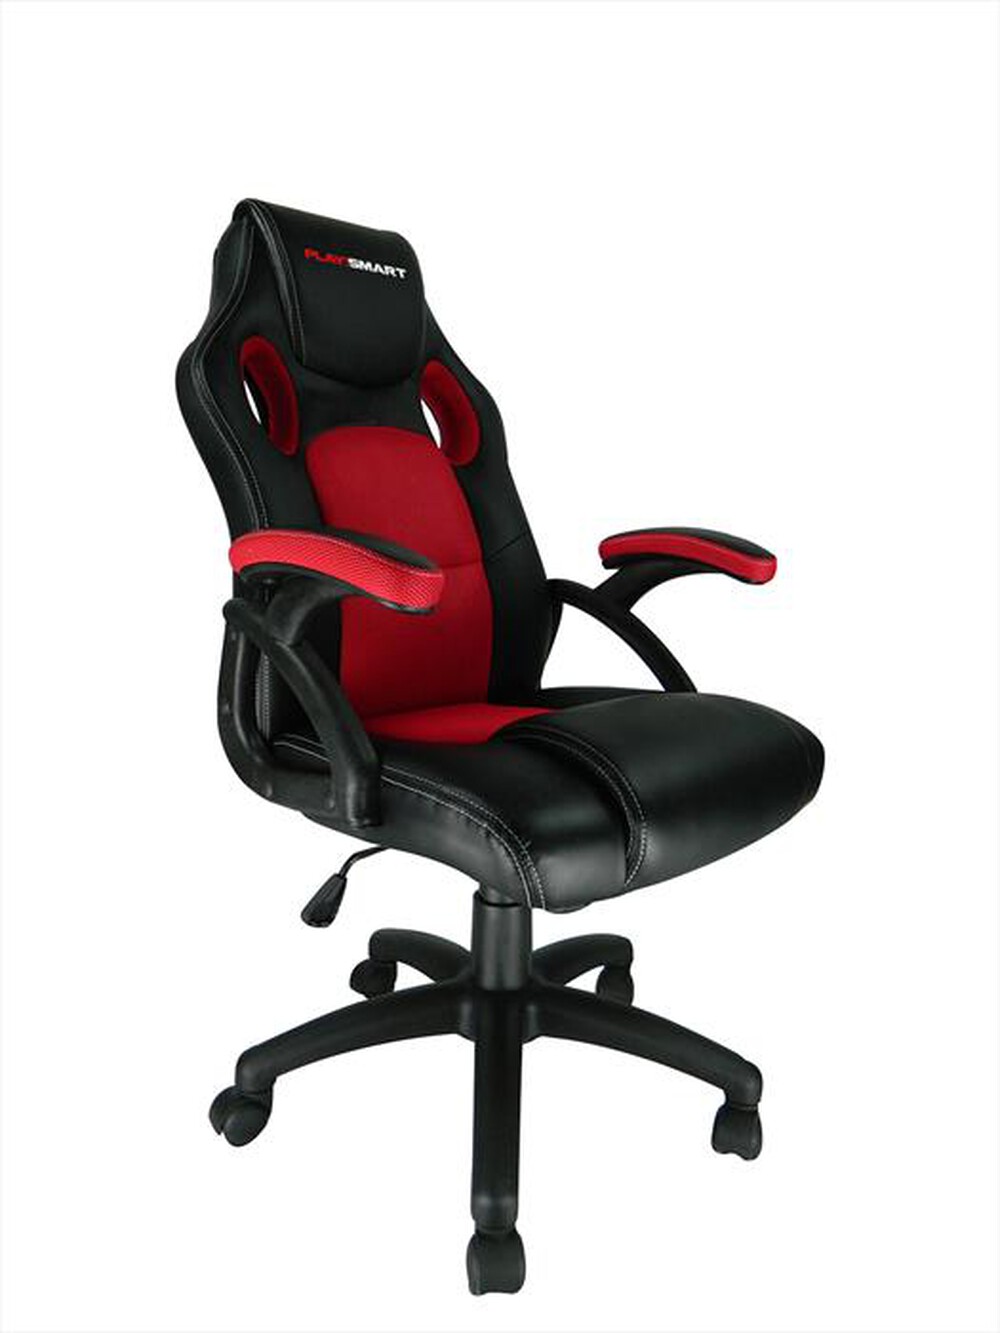 "GO!SMART - Sedia gaming PLAYSMART SUPERIOR PC CHAIR-Red"